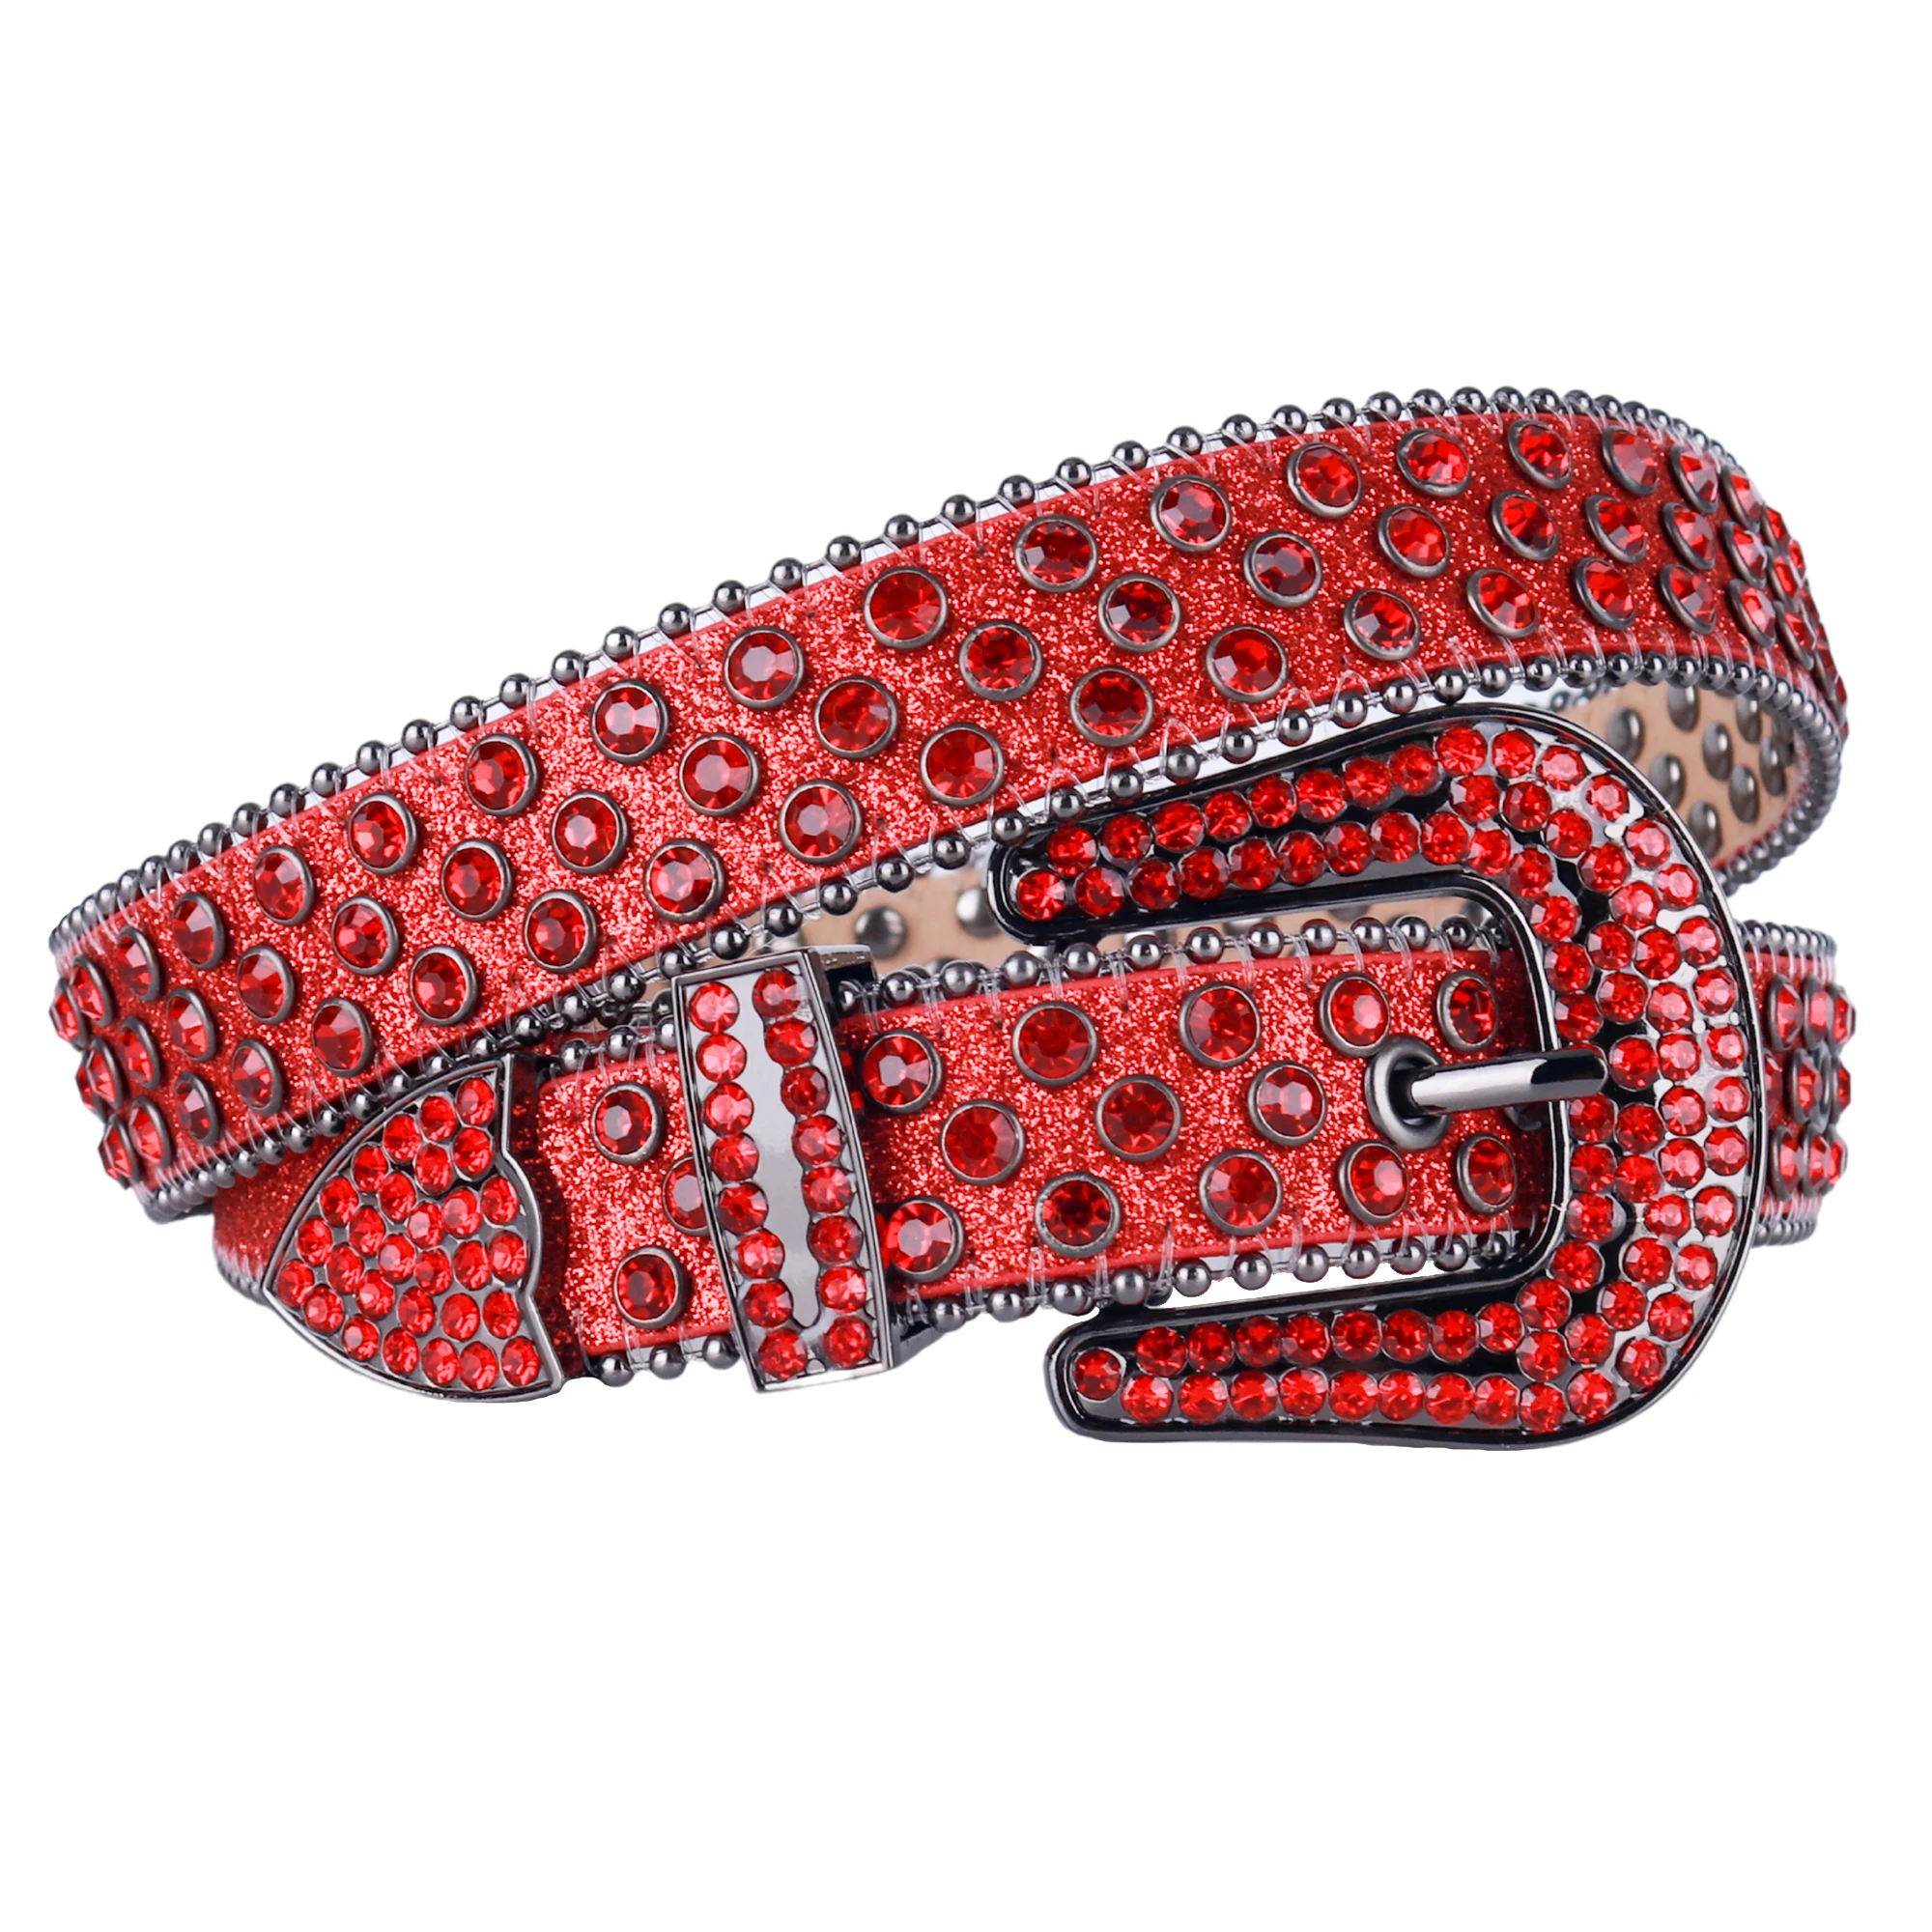 2023 Western Punk Cowboy Cowgirl Rhinestones Belts High Quality Bling Bling Diamond Crystal Studded Belt For Jeans For Women Man